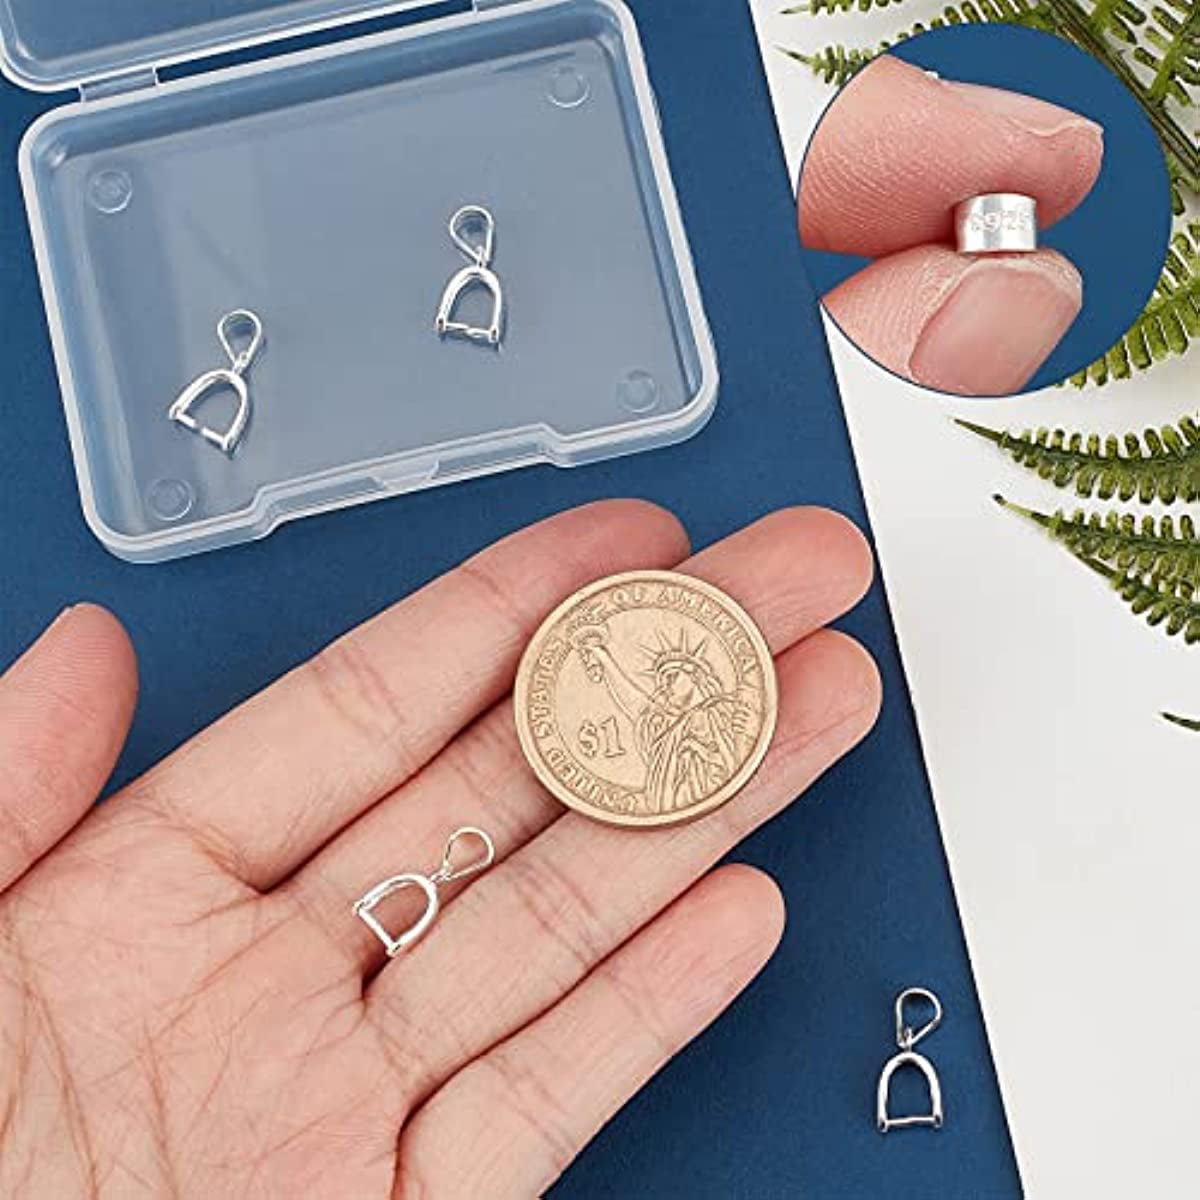  Qulltk 925 Sterling Silver Pinch Bails for Jewelry Making  Pendant Clasp Pinch Clip Bail Clasps 3 Sizes Pendant Jewelry Connector for  Necklace Dangle Charm DIY Craft Making